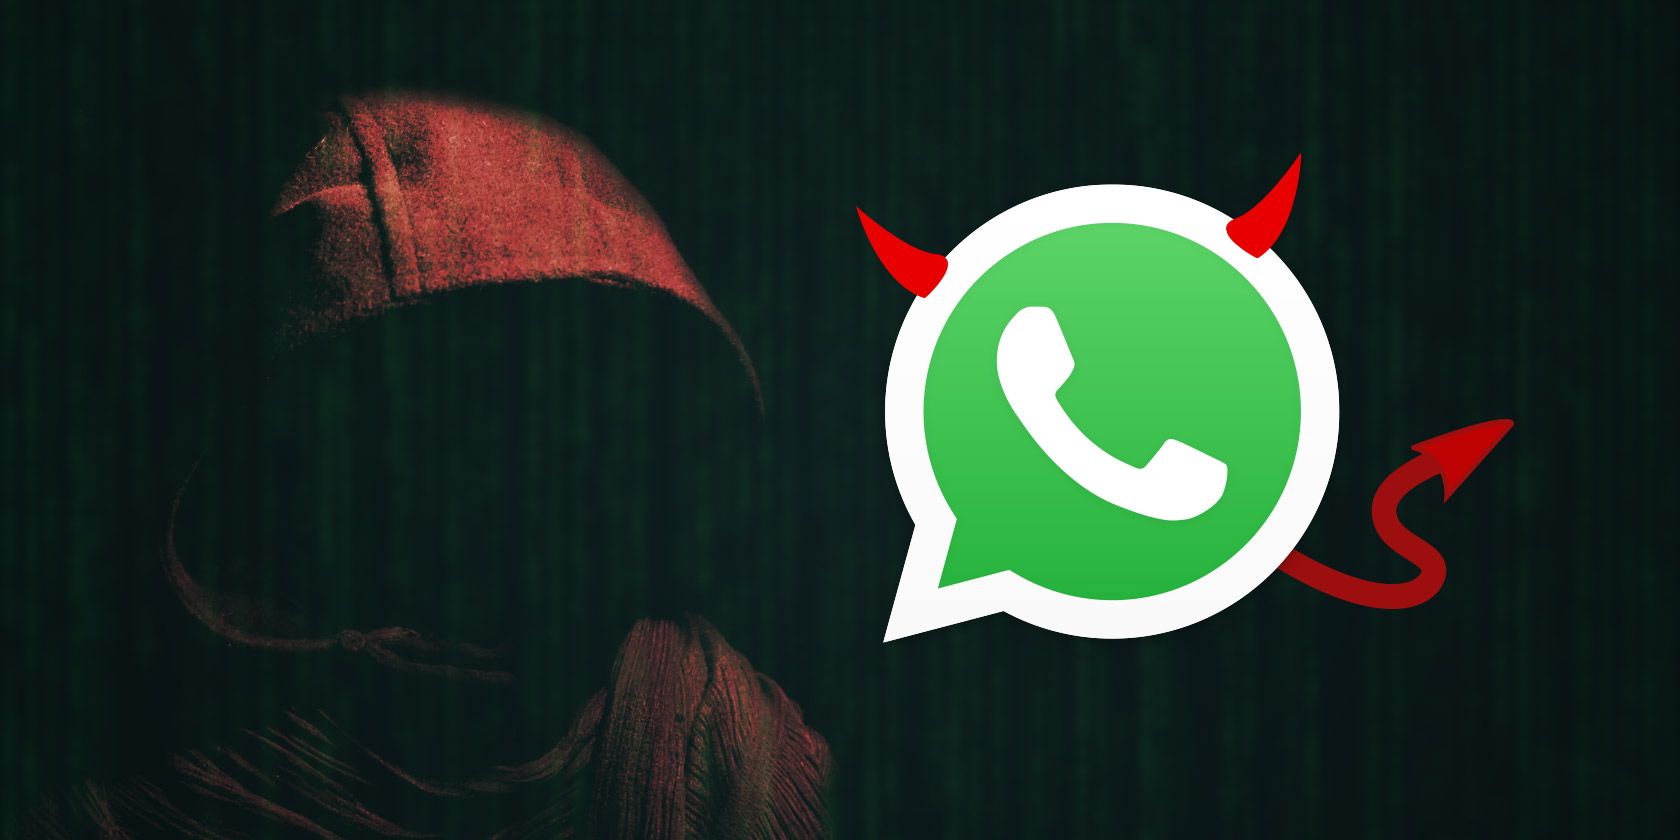 what about whatsapp scams